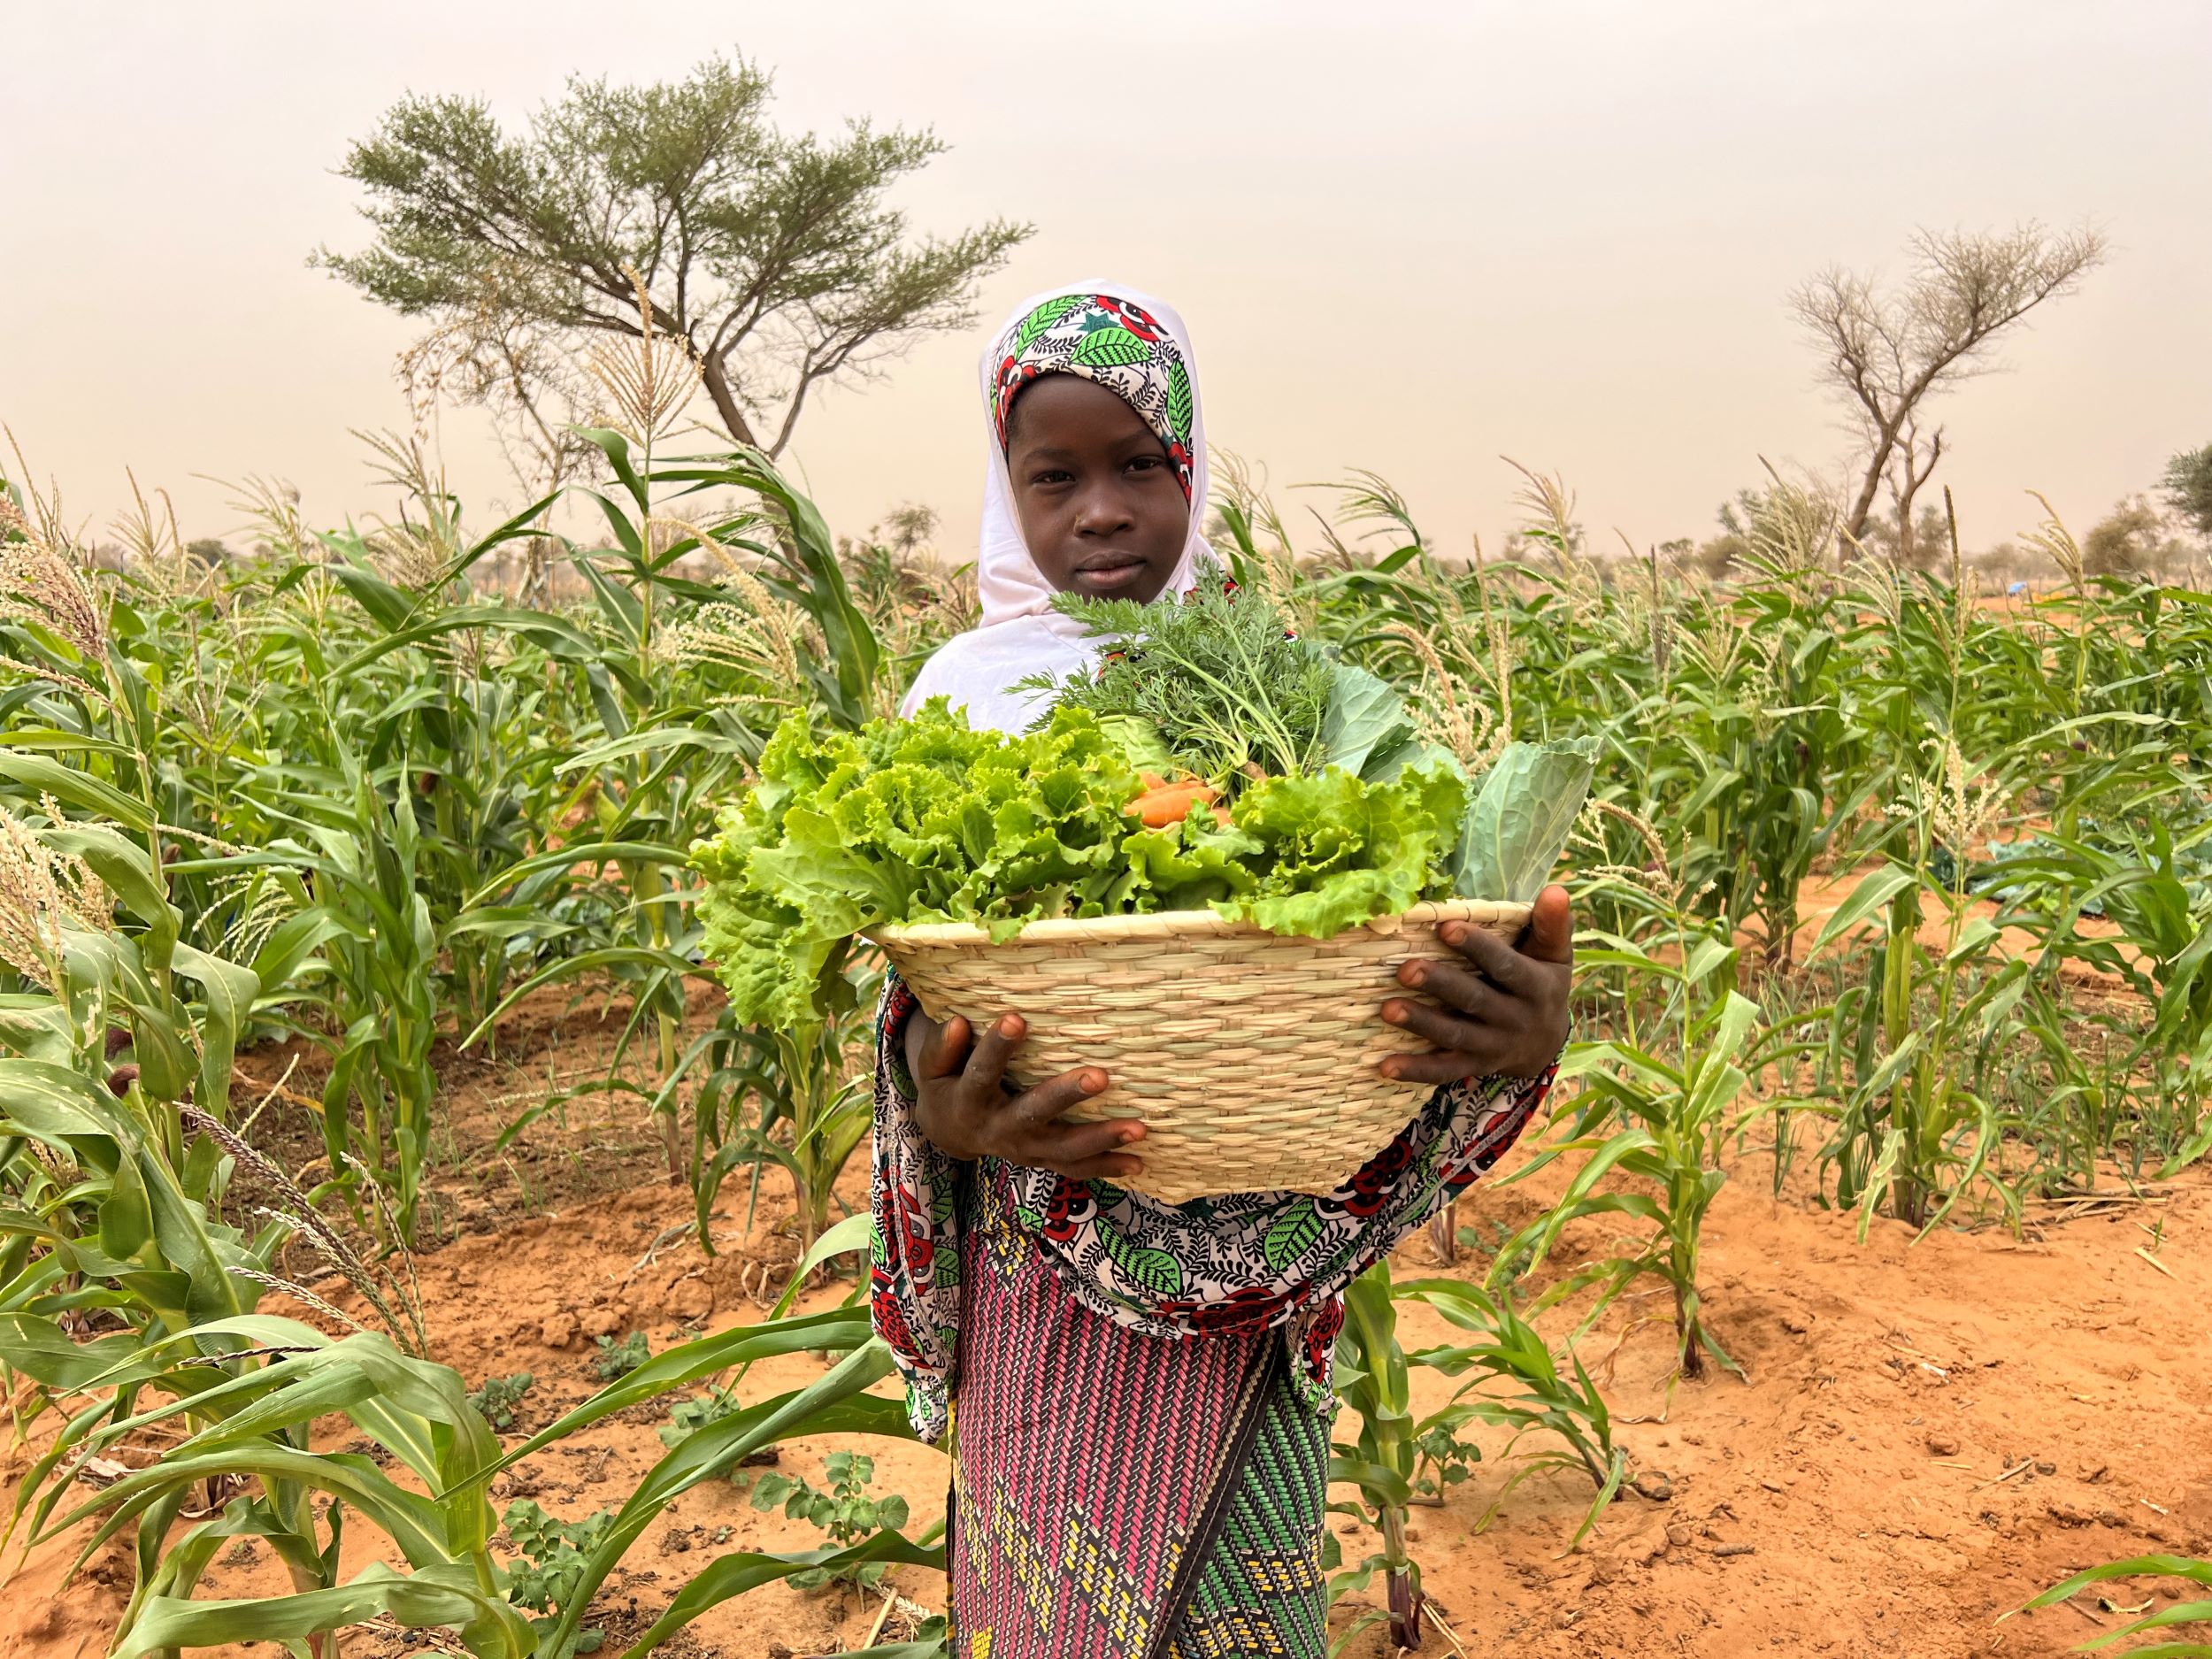 Girl wearing headscarf holds basket of green produce in a field of green